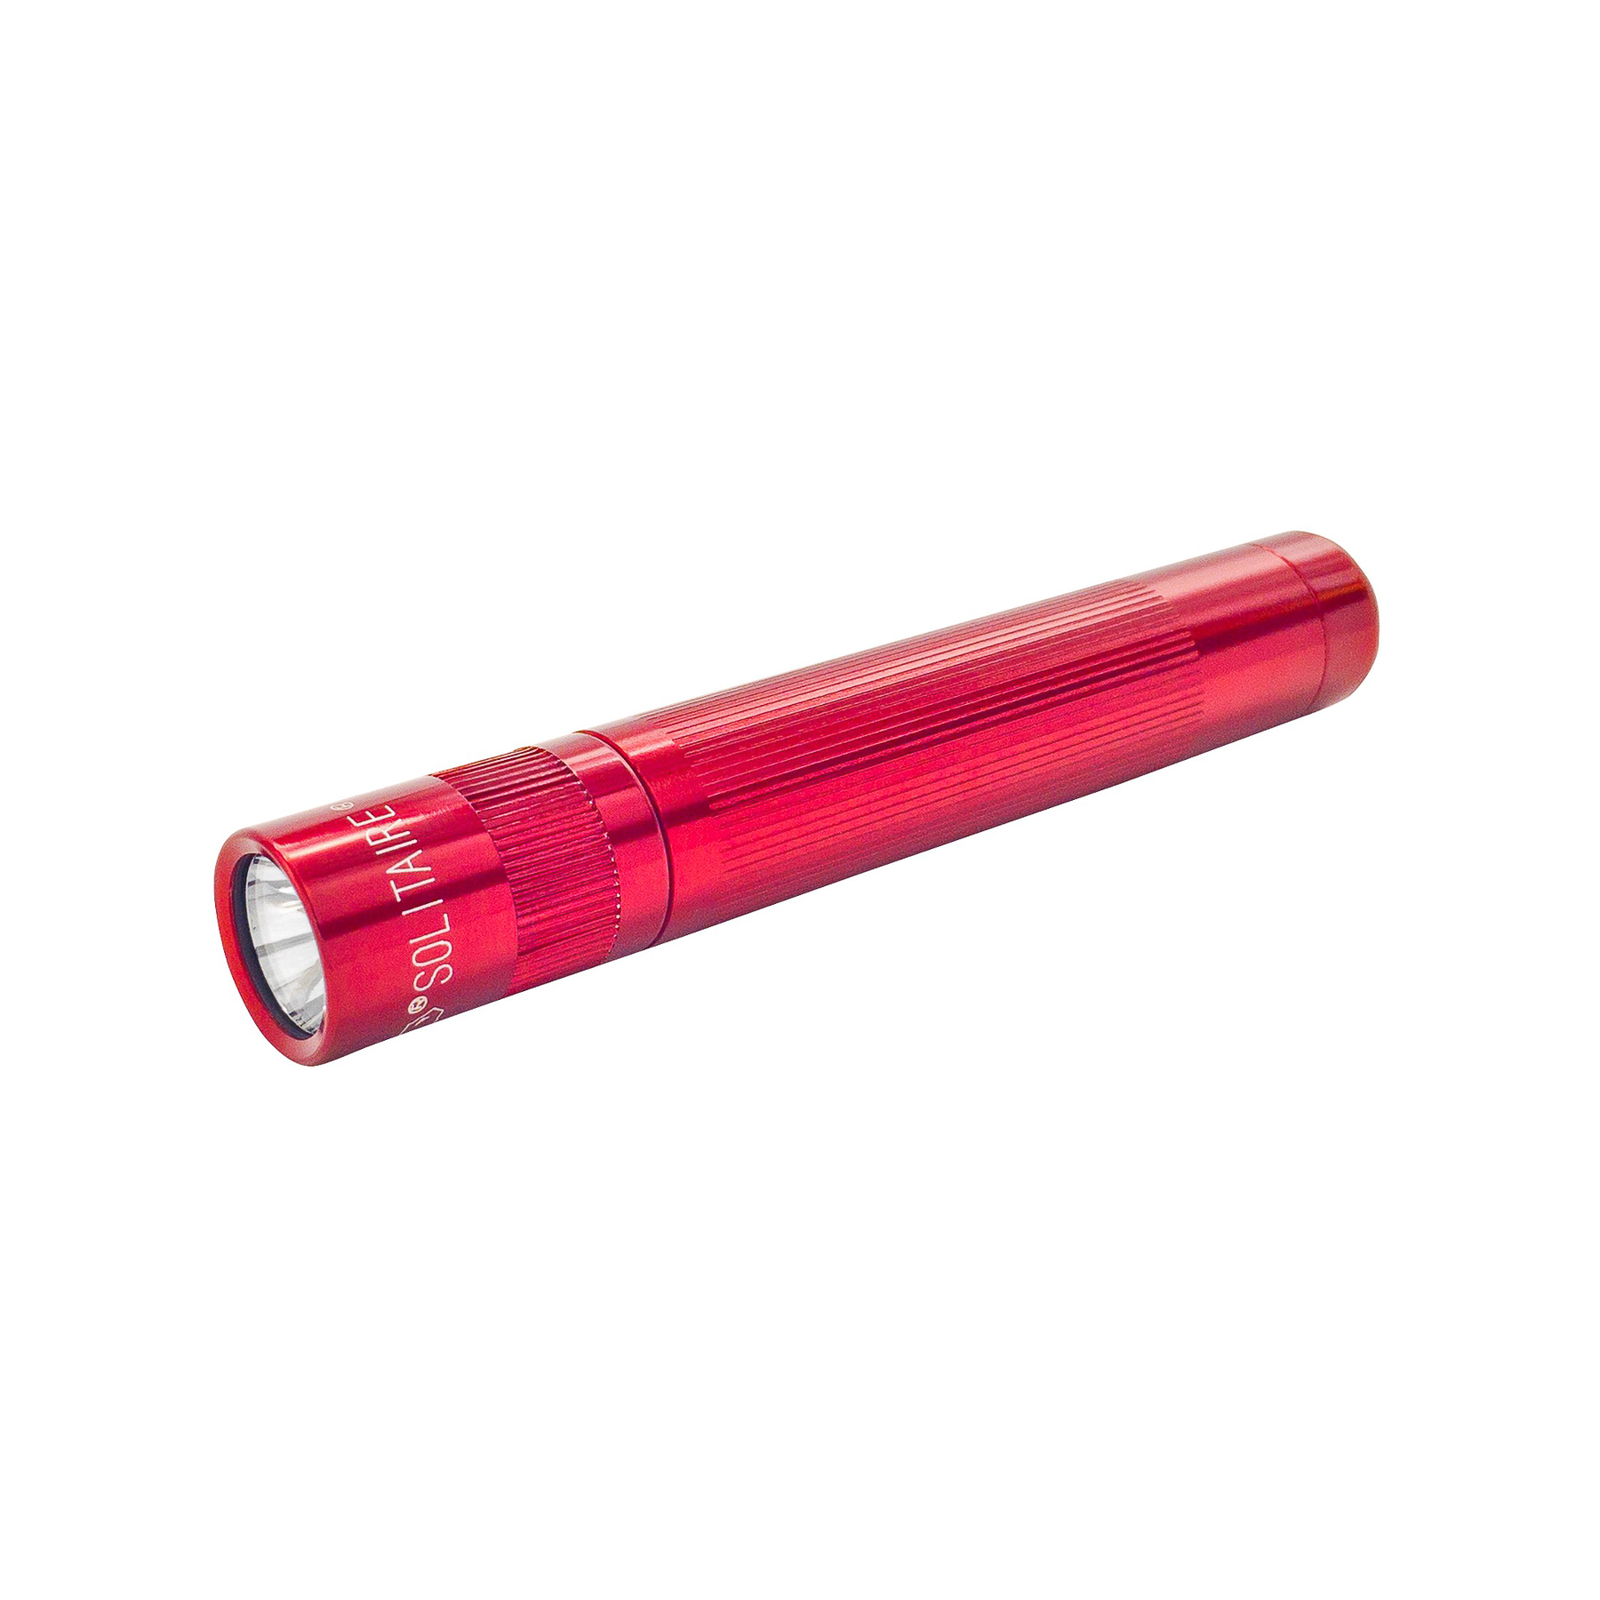 Maglite Xenon ficklampa Solitaire 1-cell AAA röd